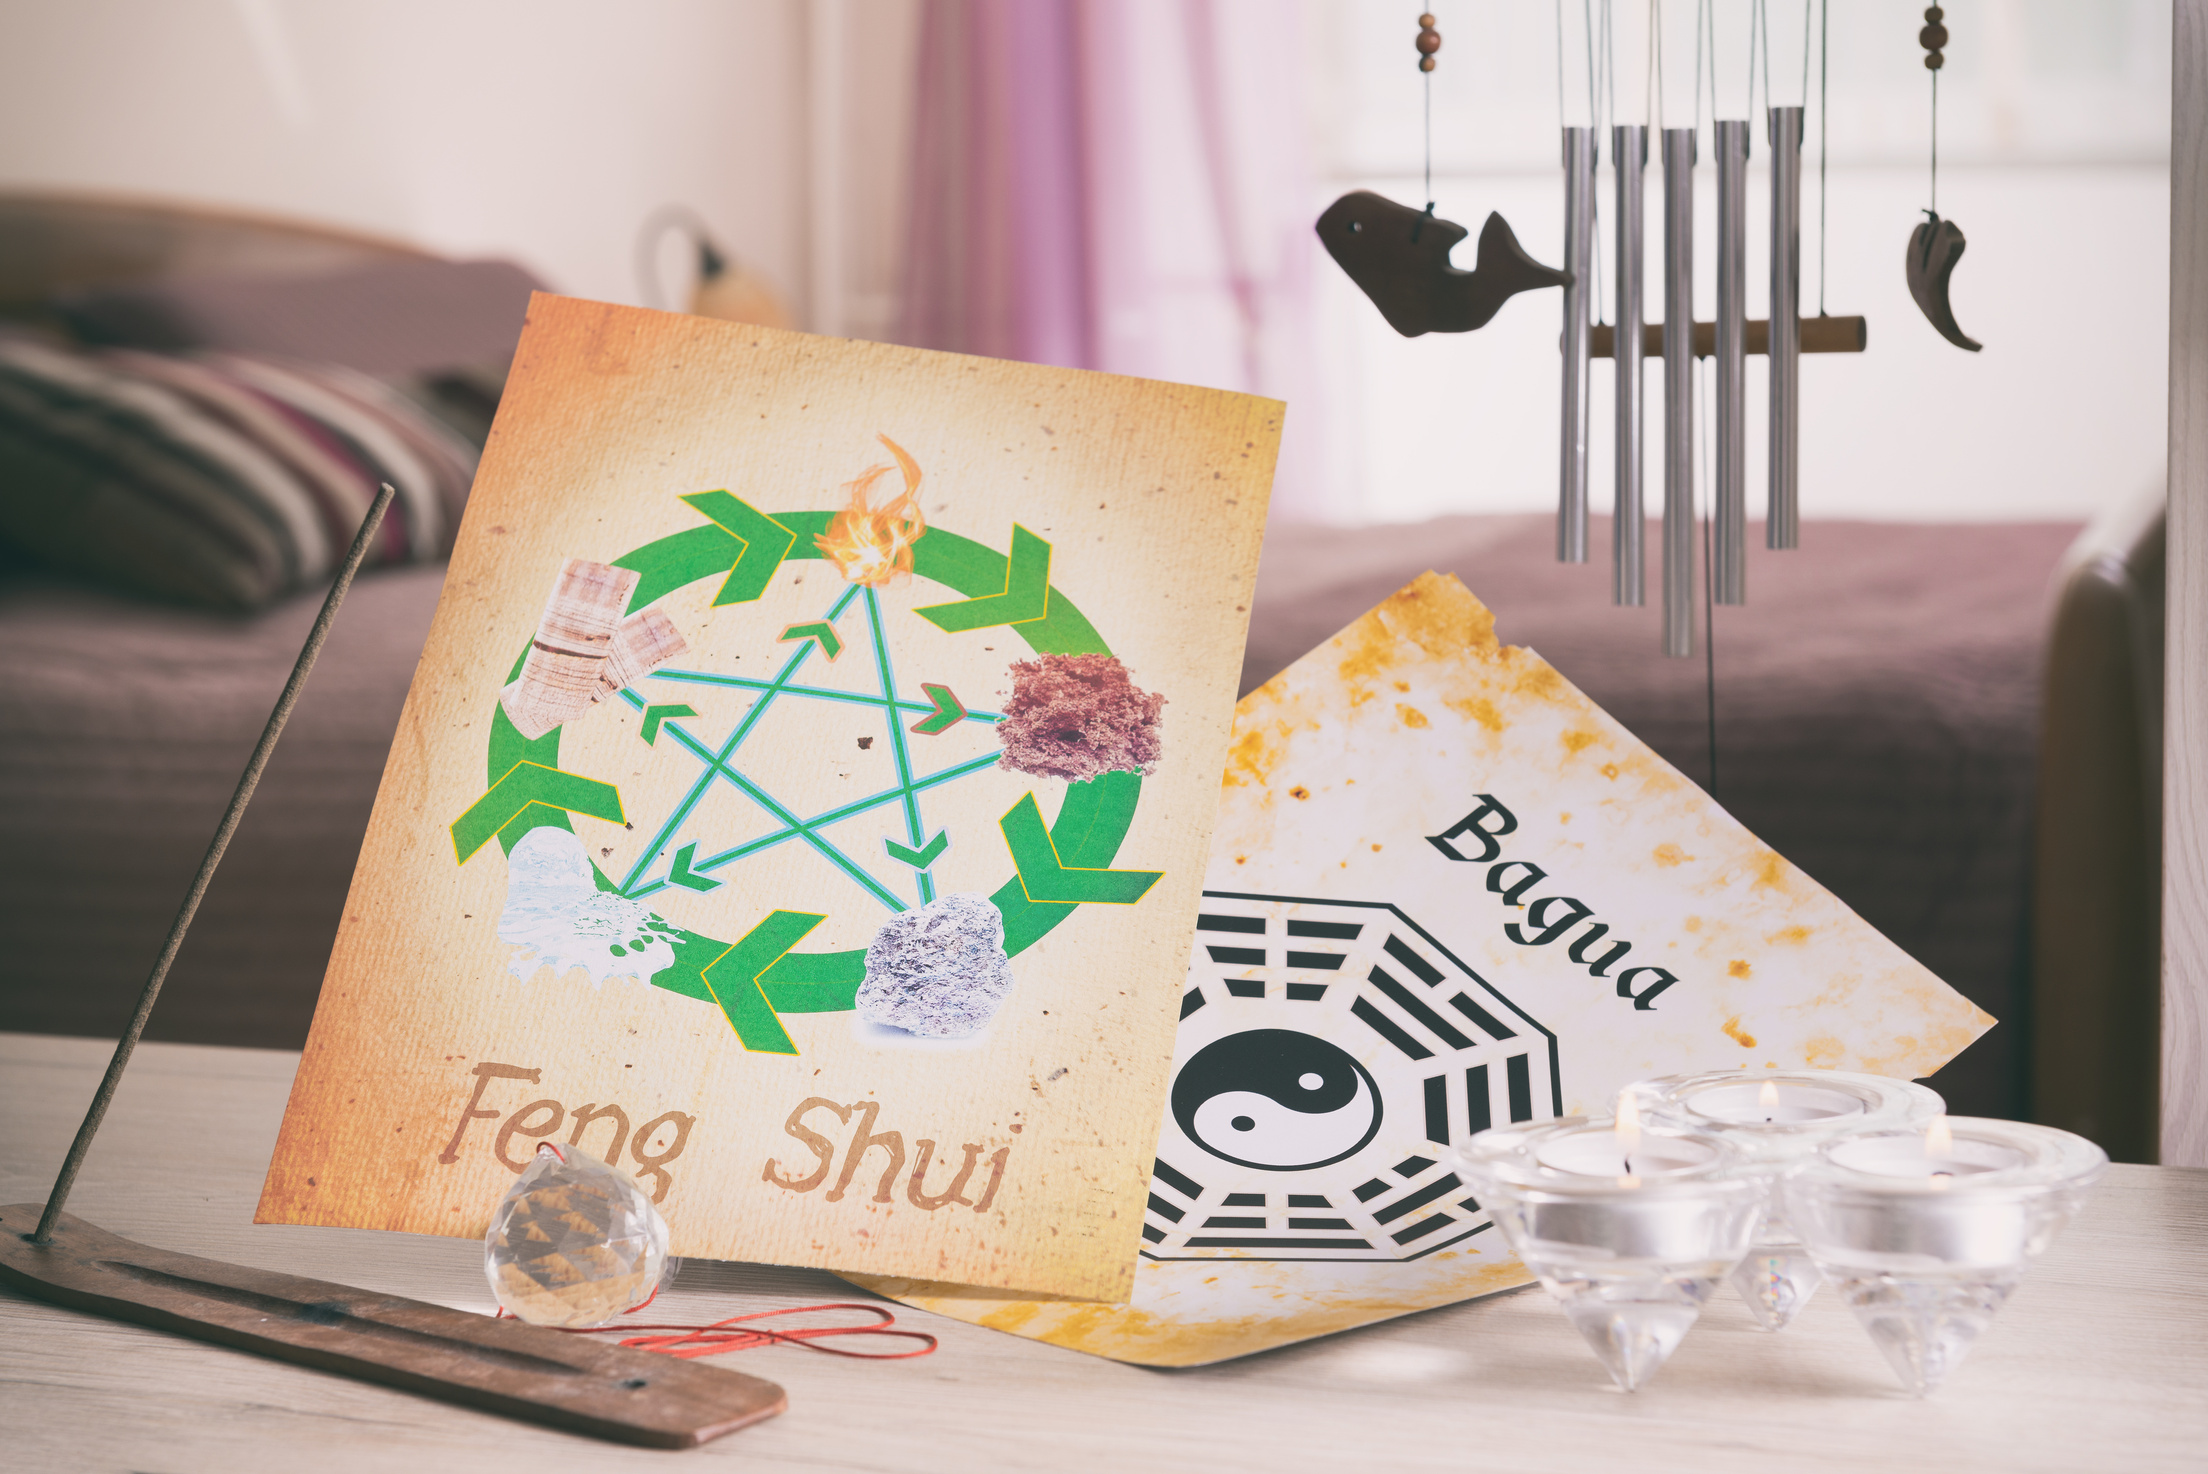 Concept image of Feng Shui